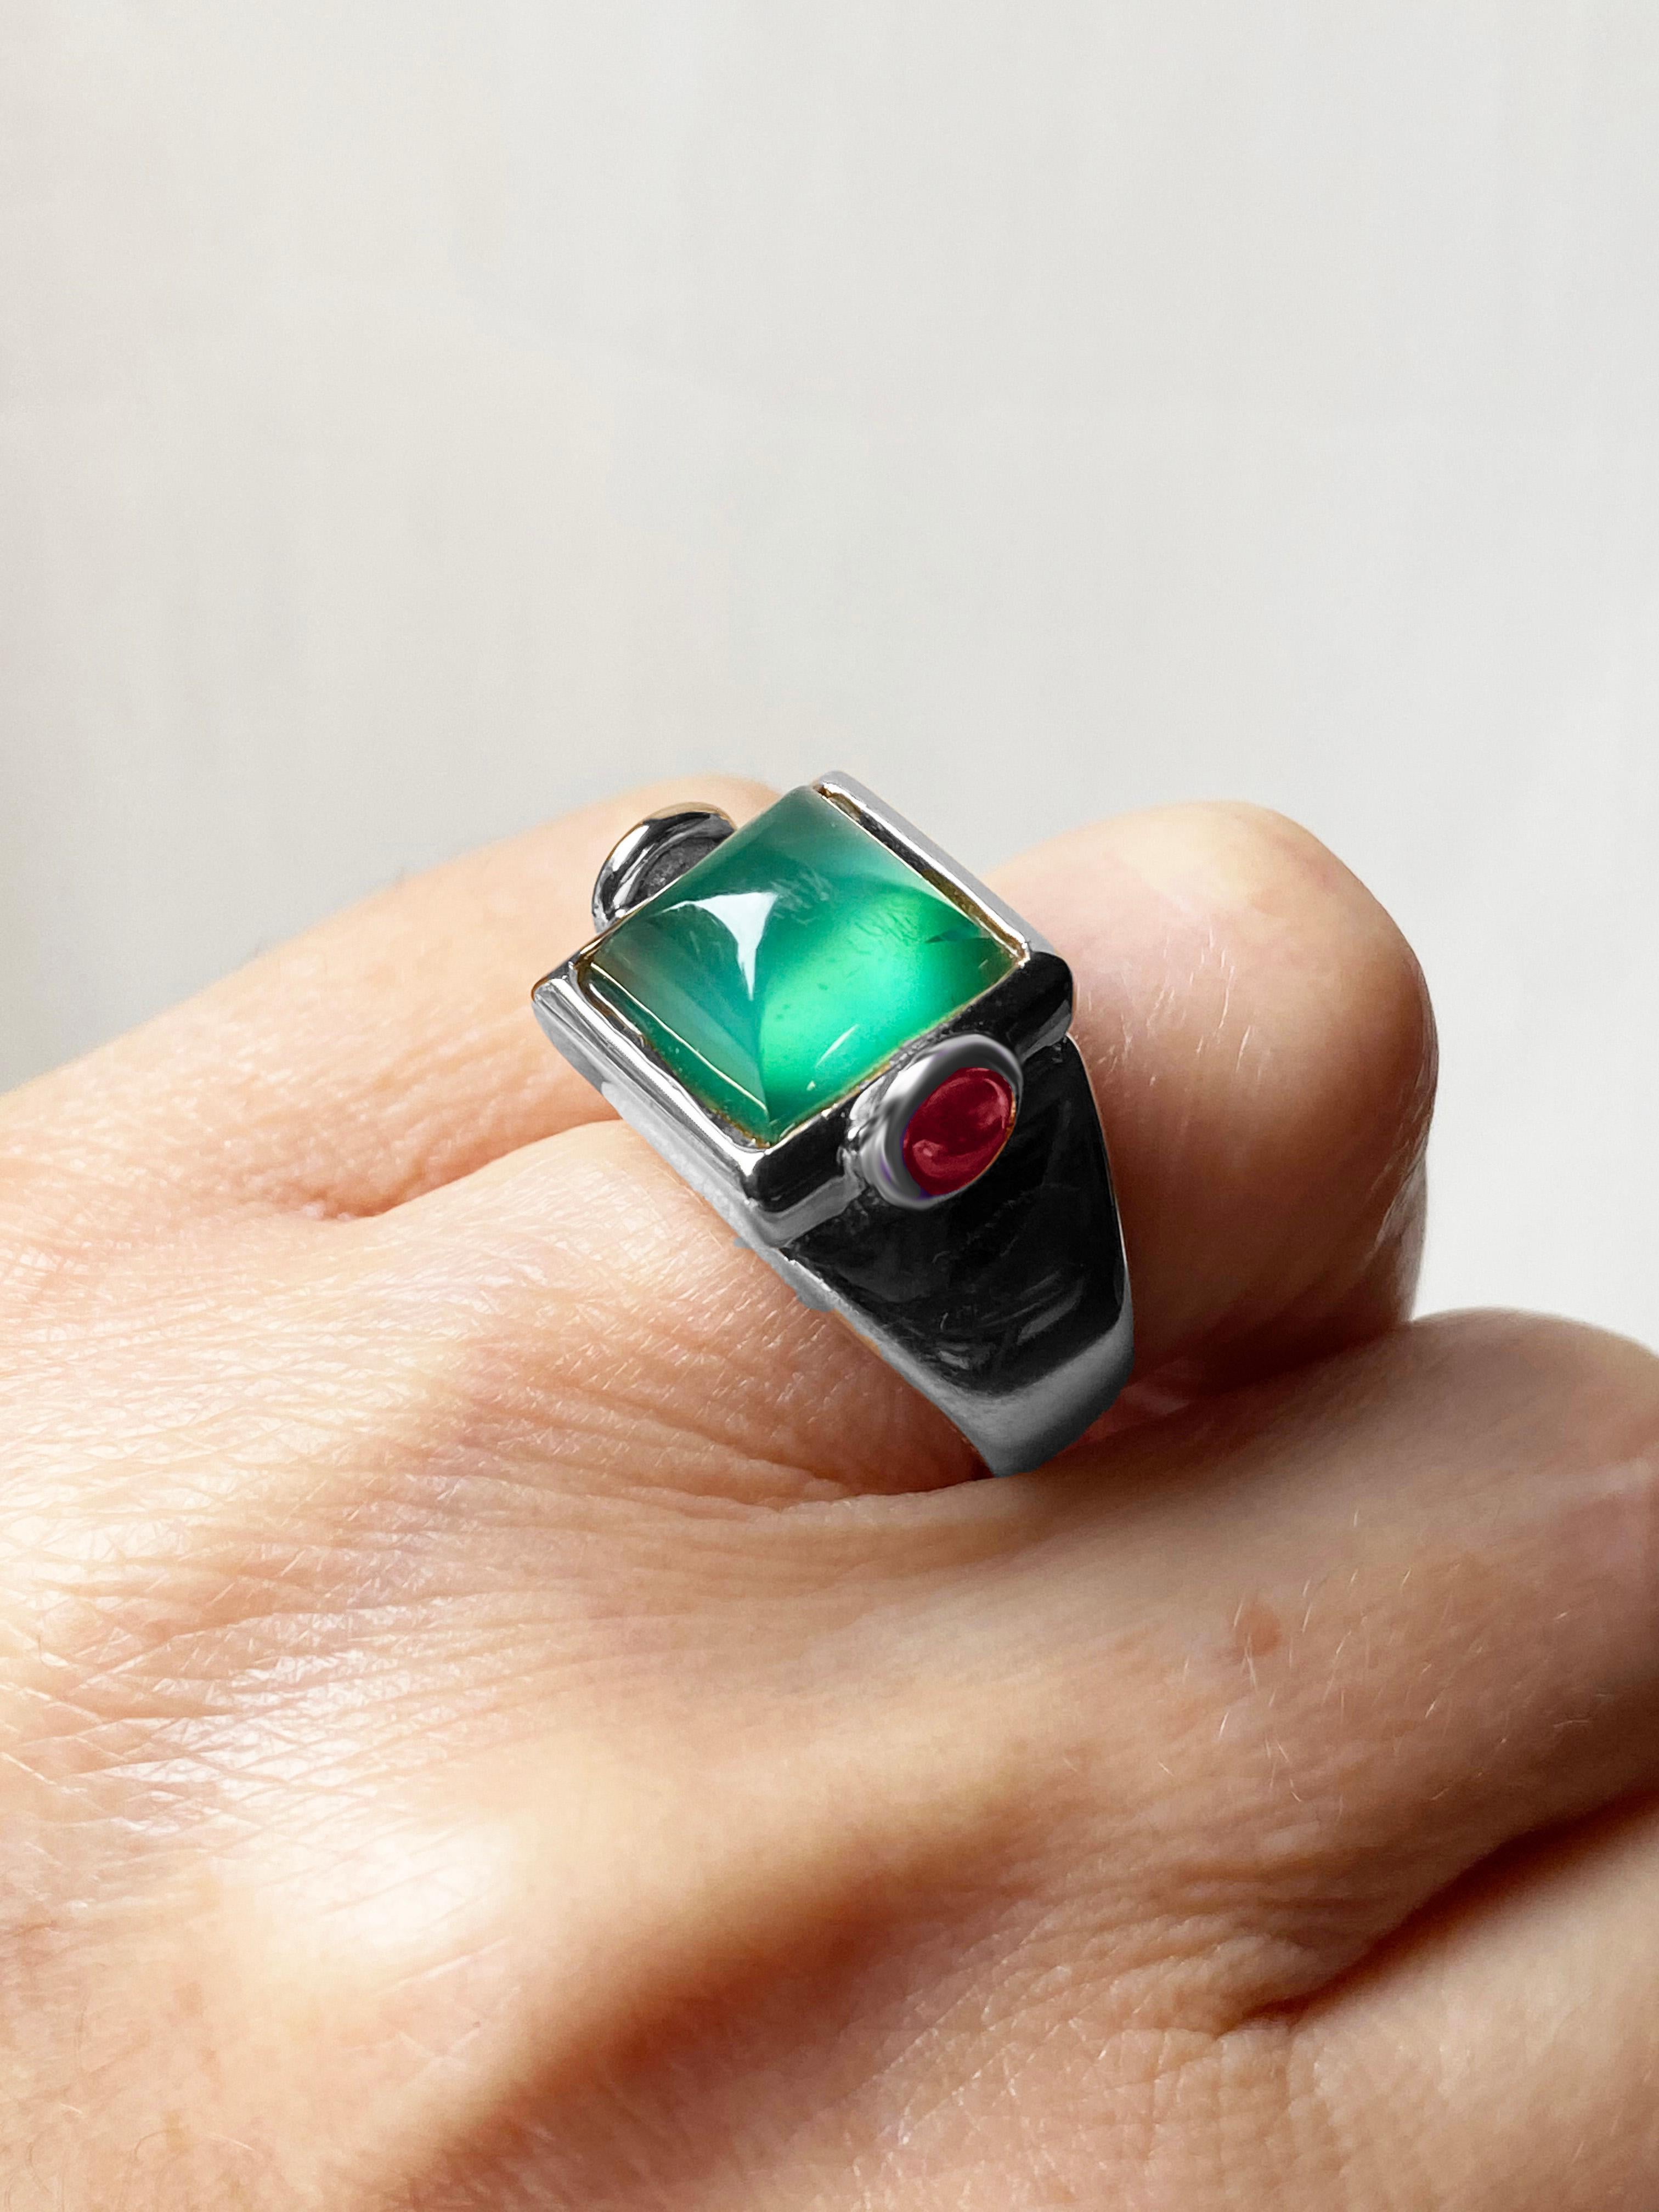 Art Deco Rossella Ugolini Platinum Rubies Cocktail Ring Made in Italy For Sale